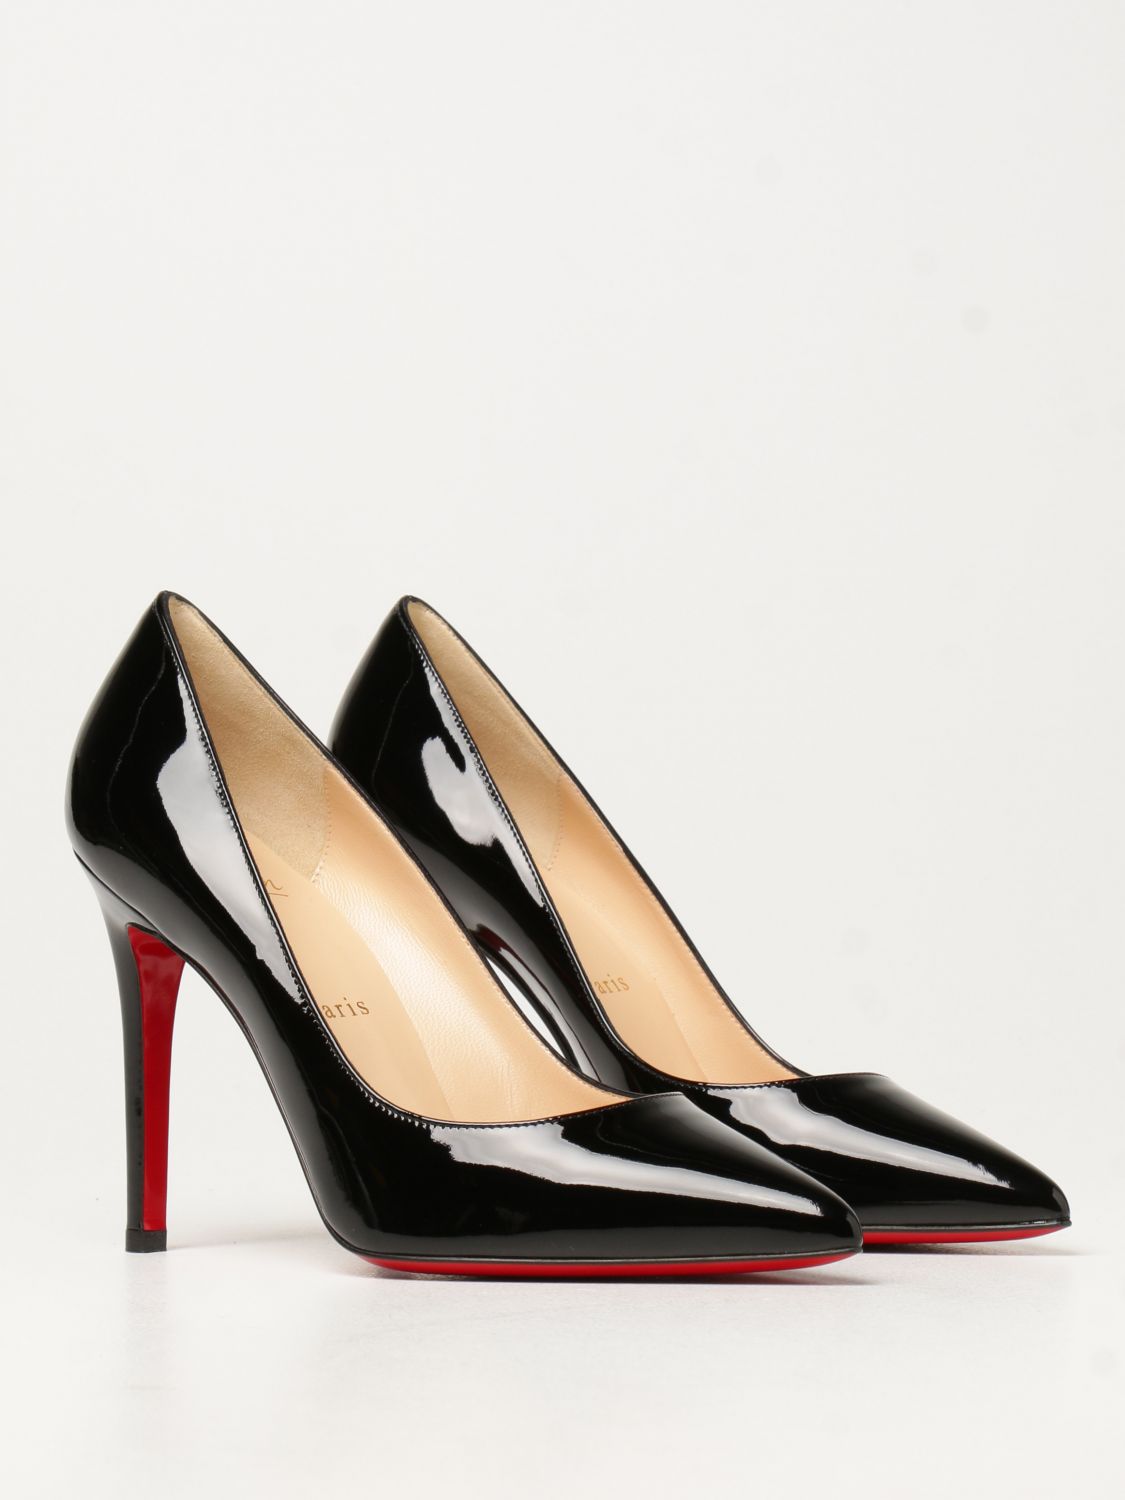 CHRISTIAN LOUBOUTIN: Pigalle pumps in patent leather | Christian Louboutin Black | Pumps Christian Louboutin 3080680 GIGLIO.COM